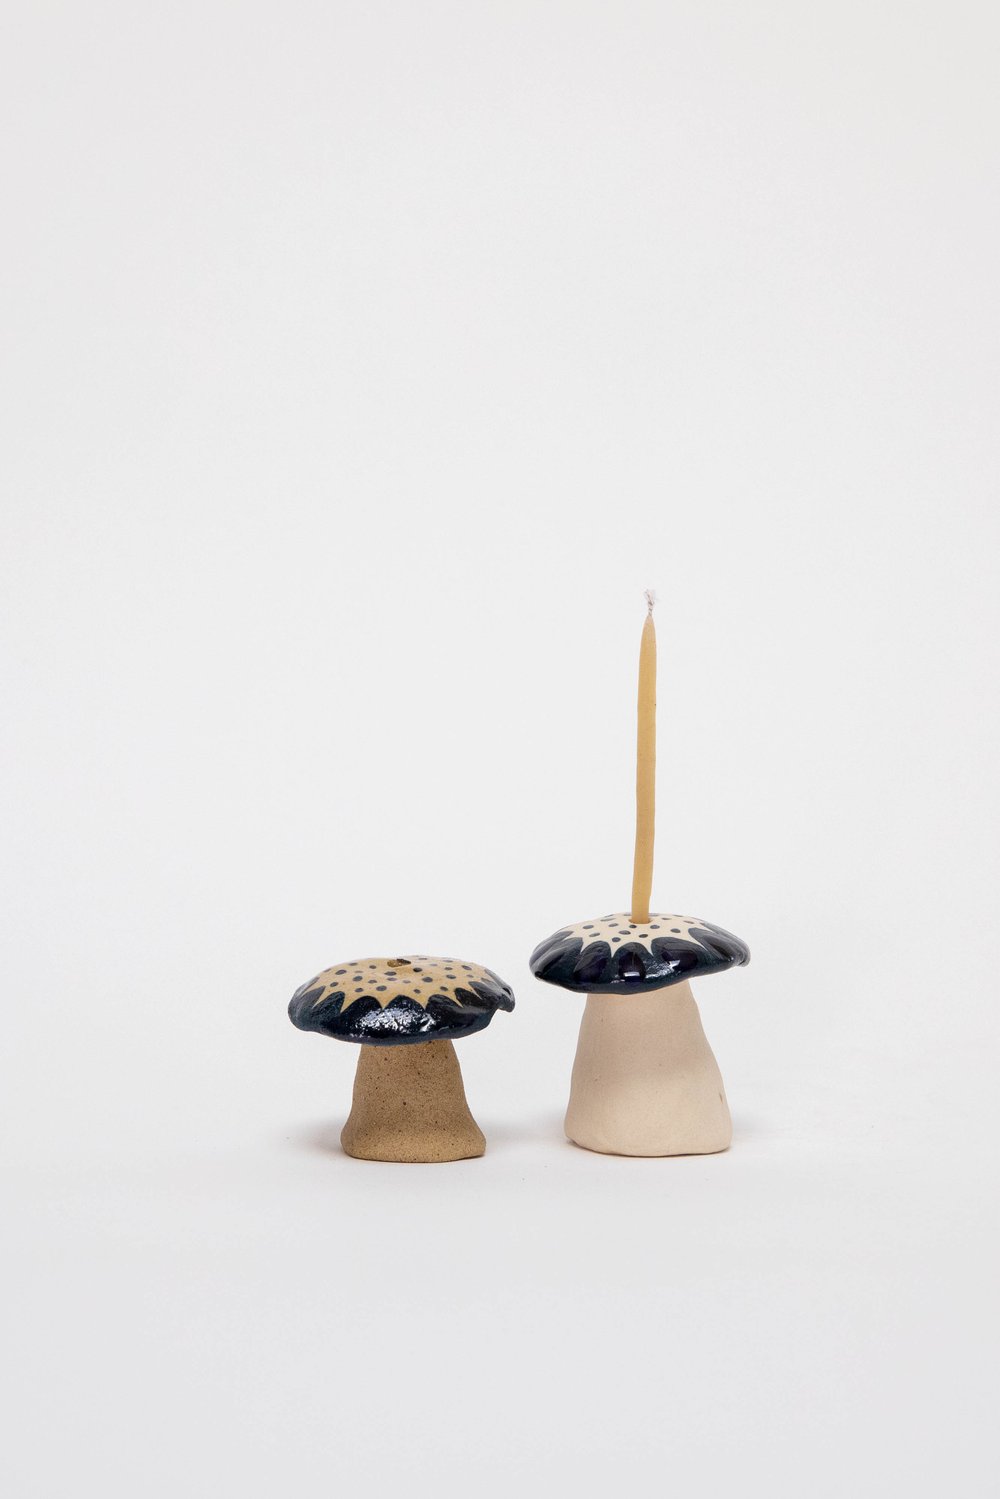 Image of Indigo Mushroom Birthday Candle Holders - Dotted Floral Cap